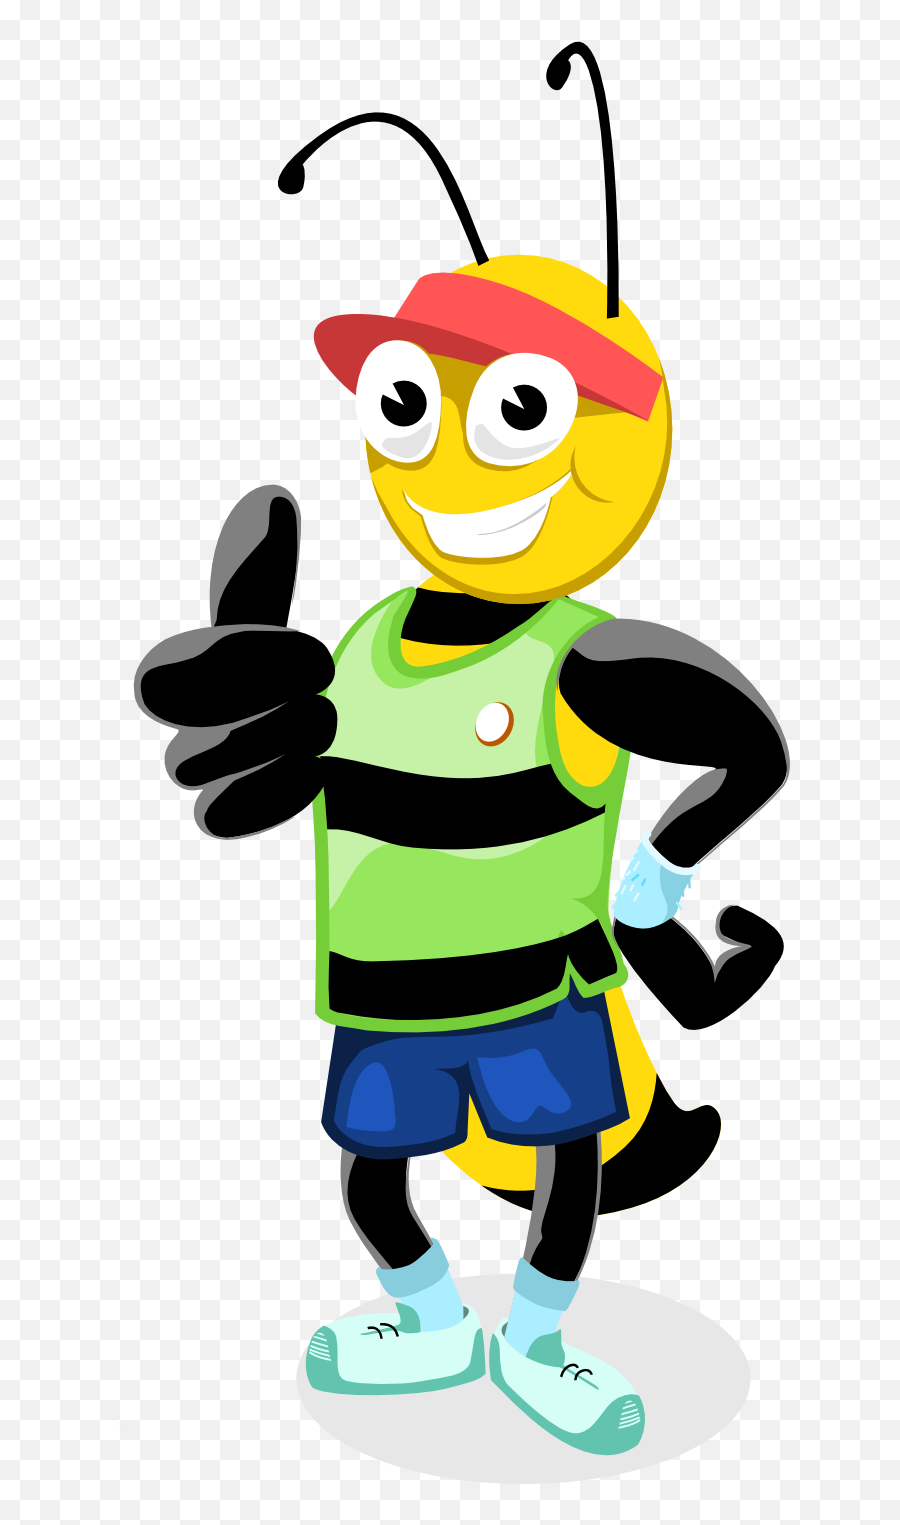 Pictures Of Animated Bees - Clipart Best Bees Emoji,Apg Emoticon